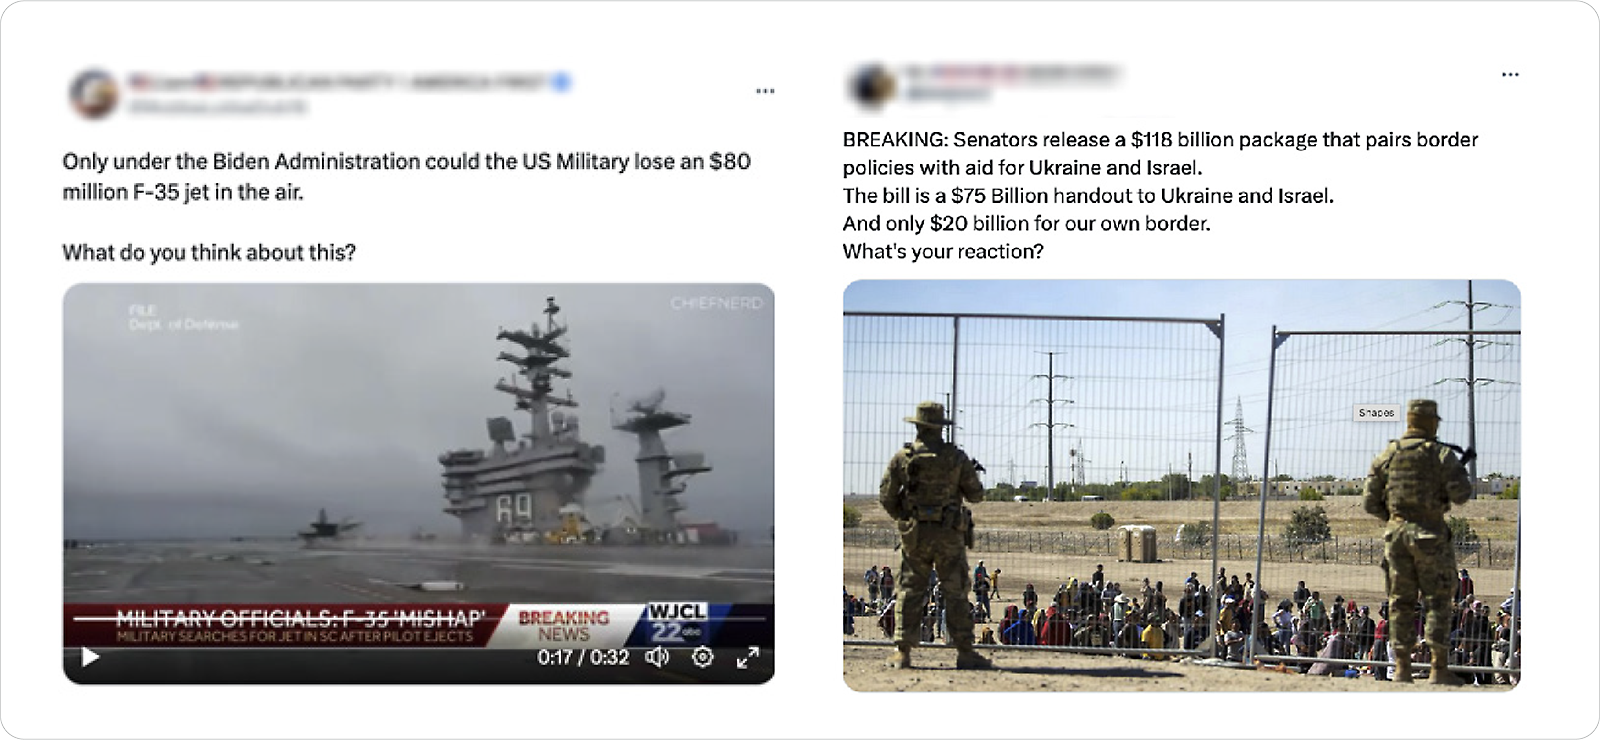 Split-screen image comparison: on left a military jet taking off from an aircraft carrier and on right a group of people sitting behind a barrier